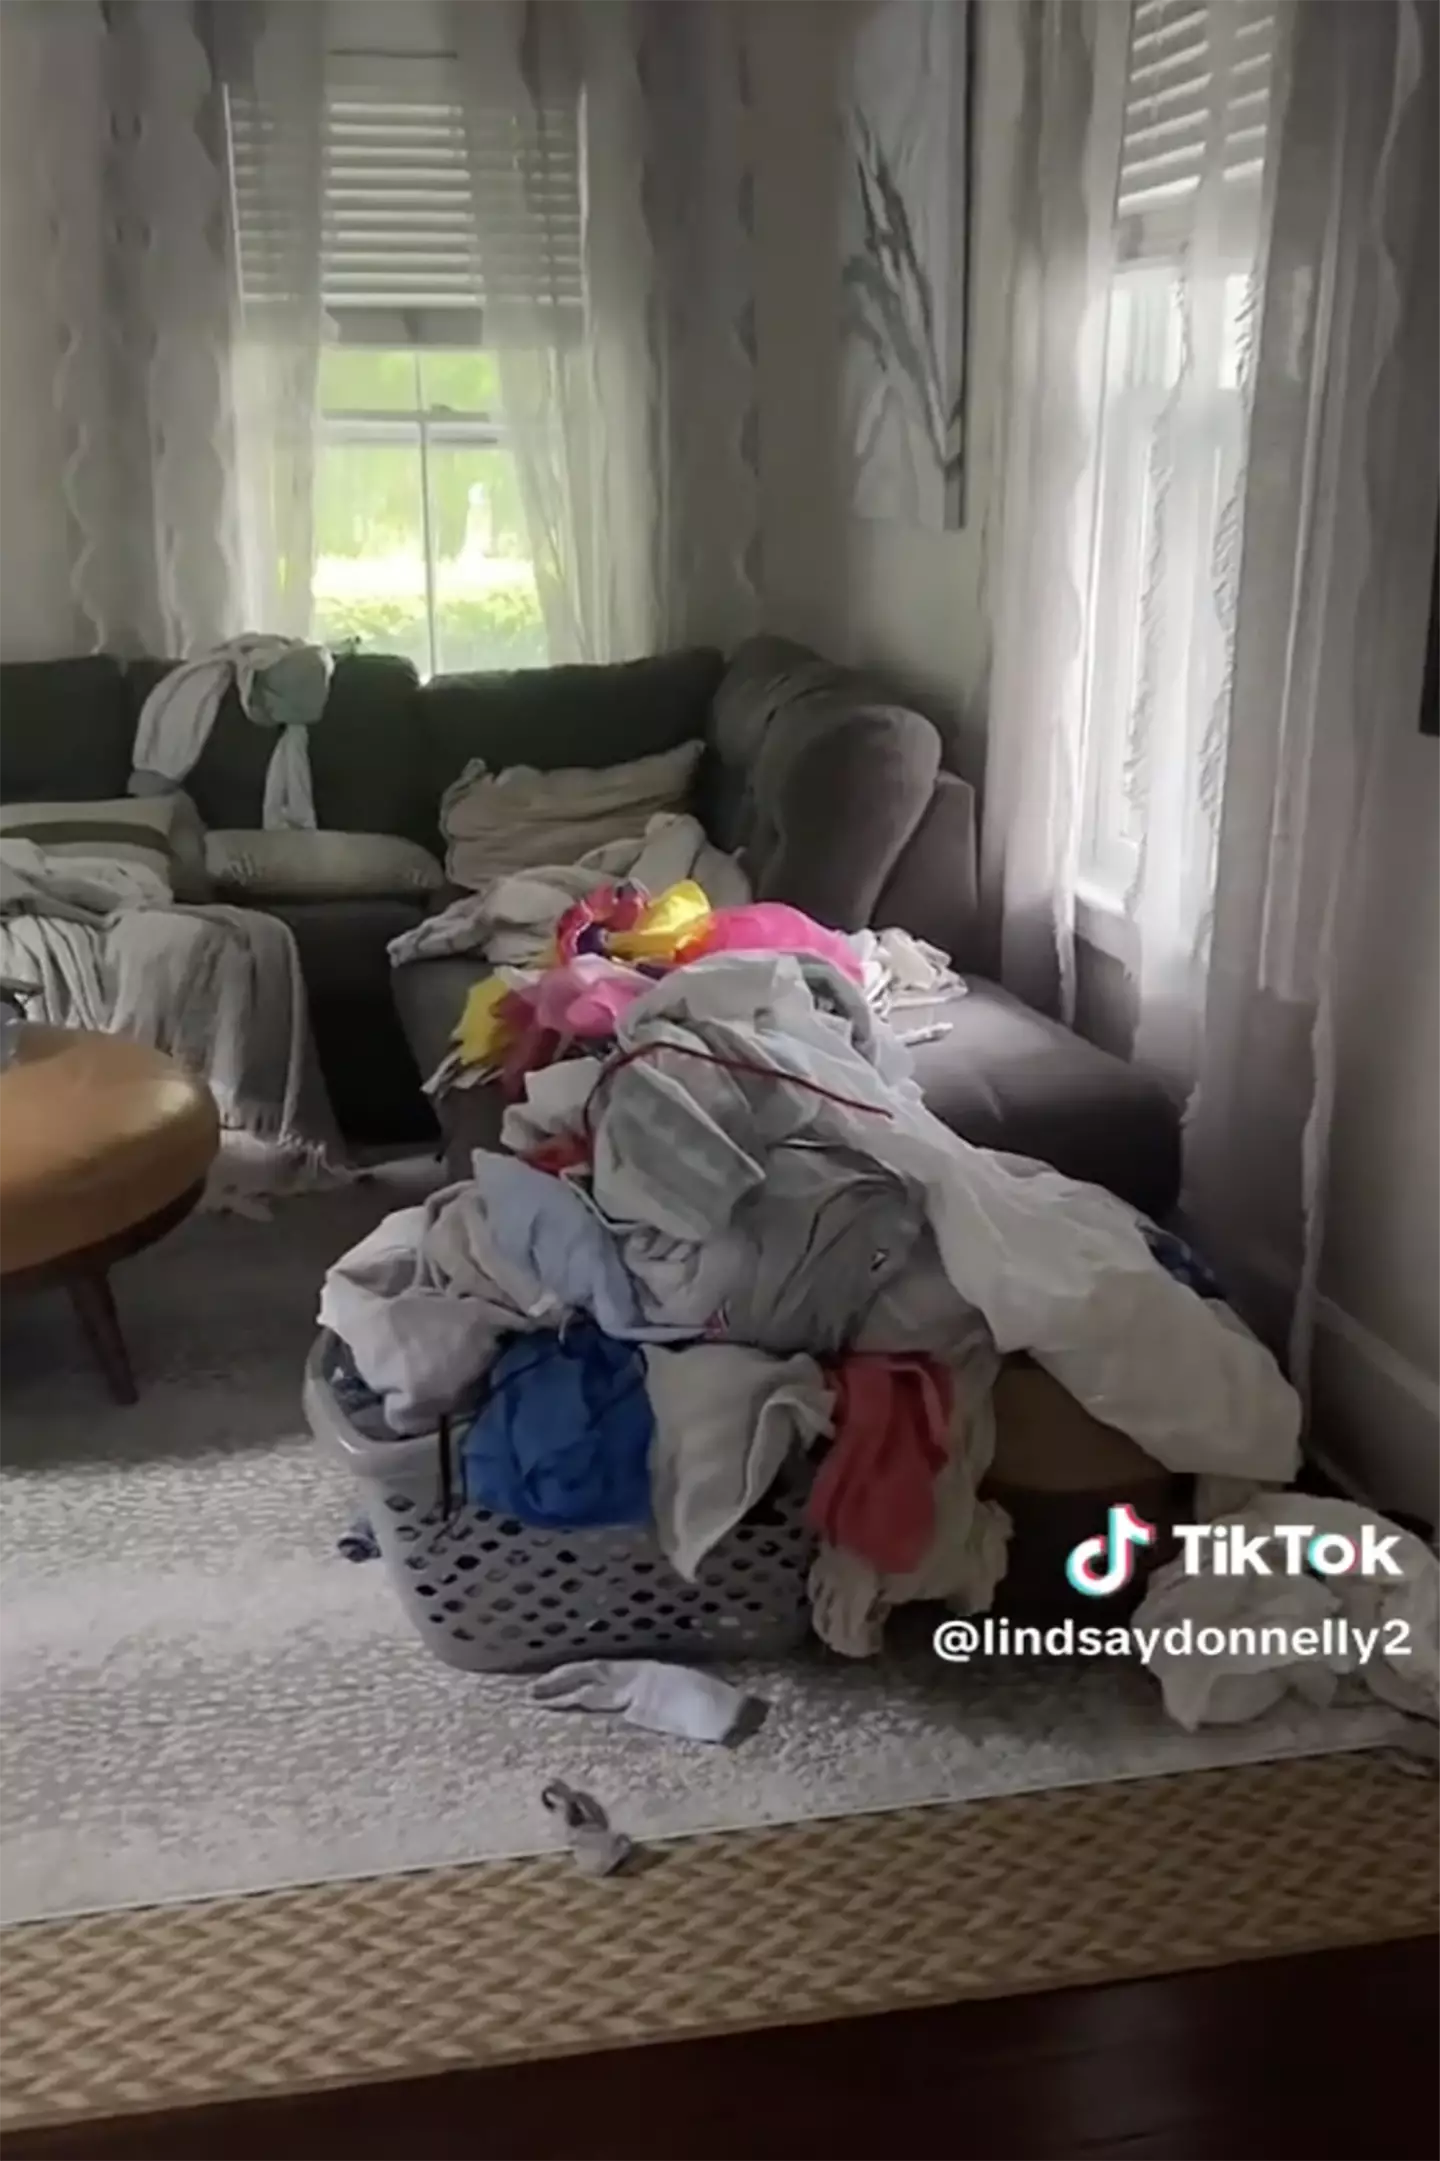 The video showed the disarray her entire house was in.